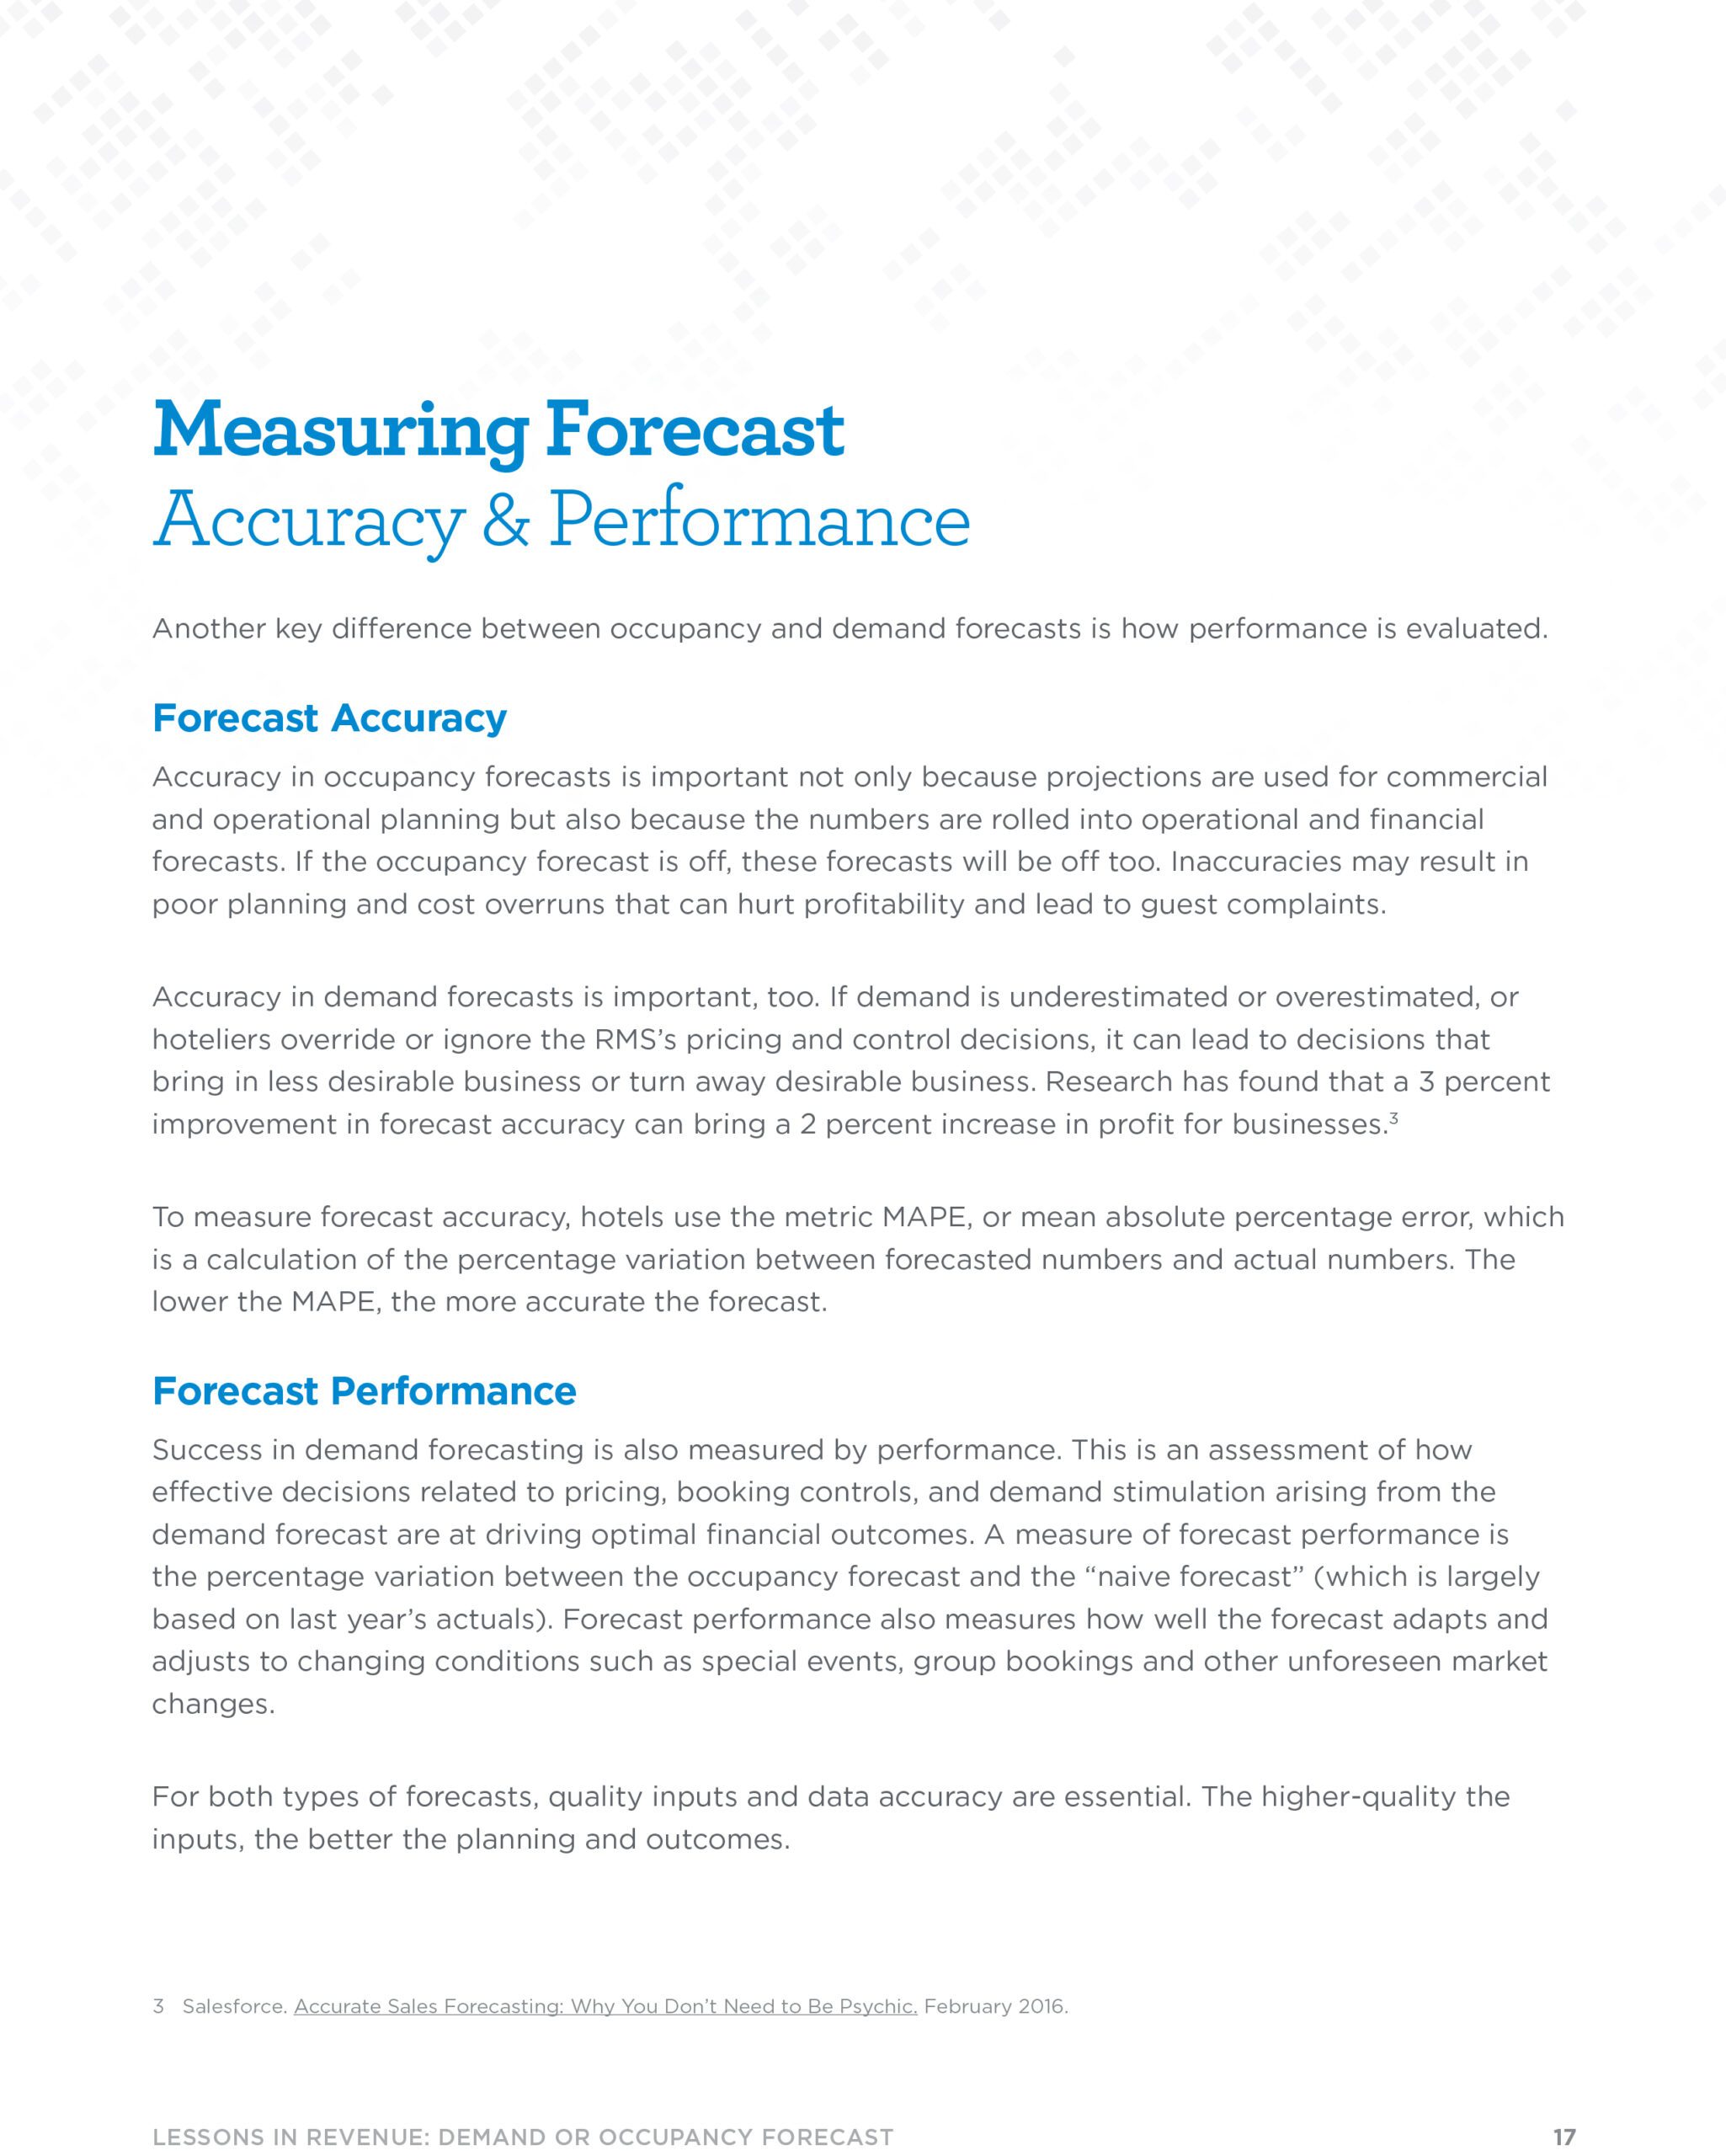 Page 16 - Measuring Forecast Accuracy and Performance